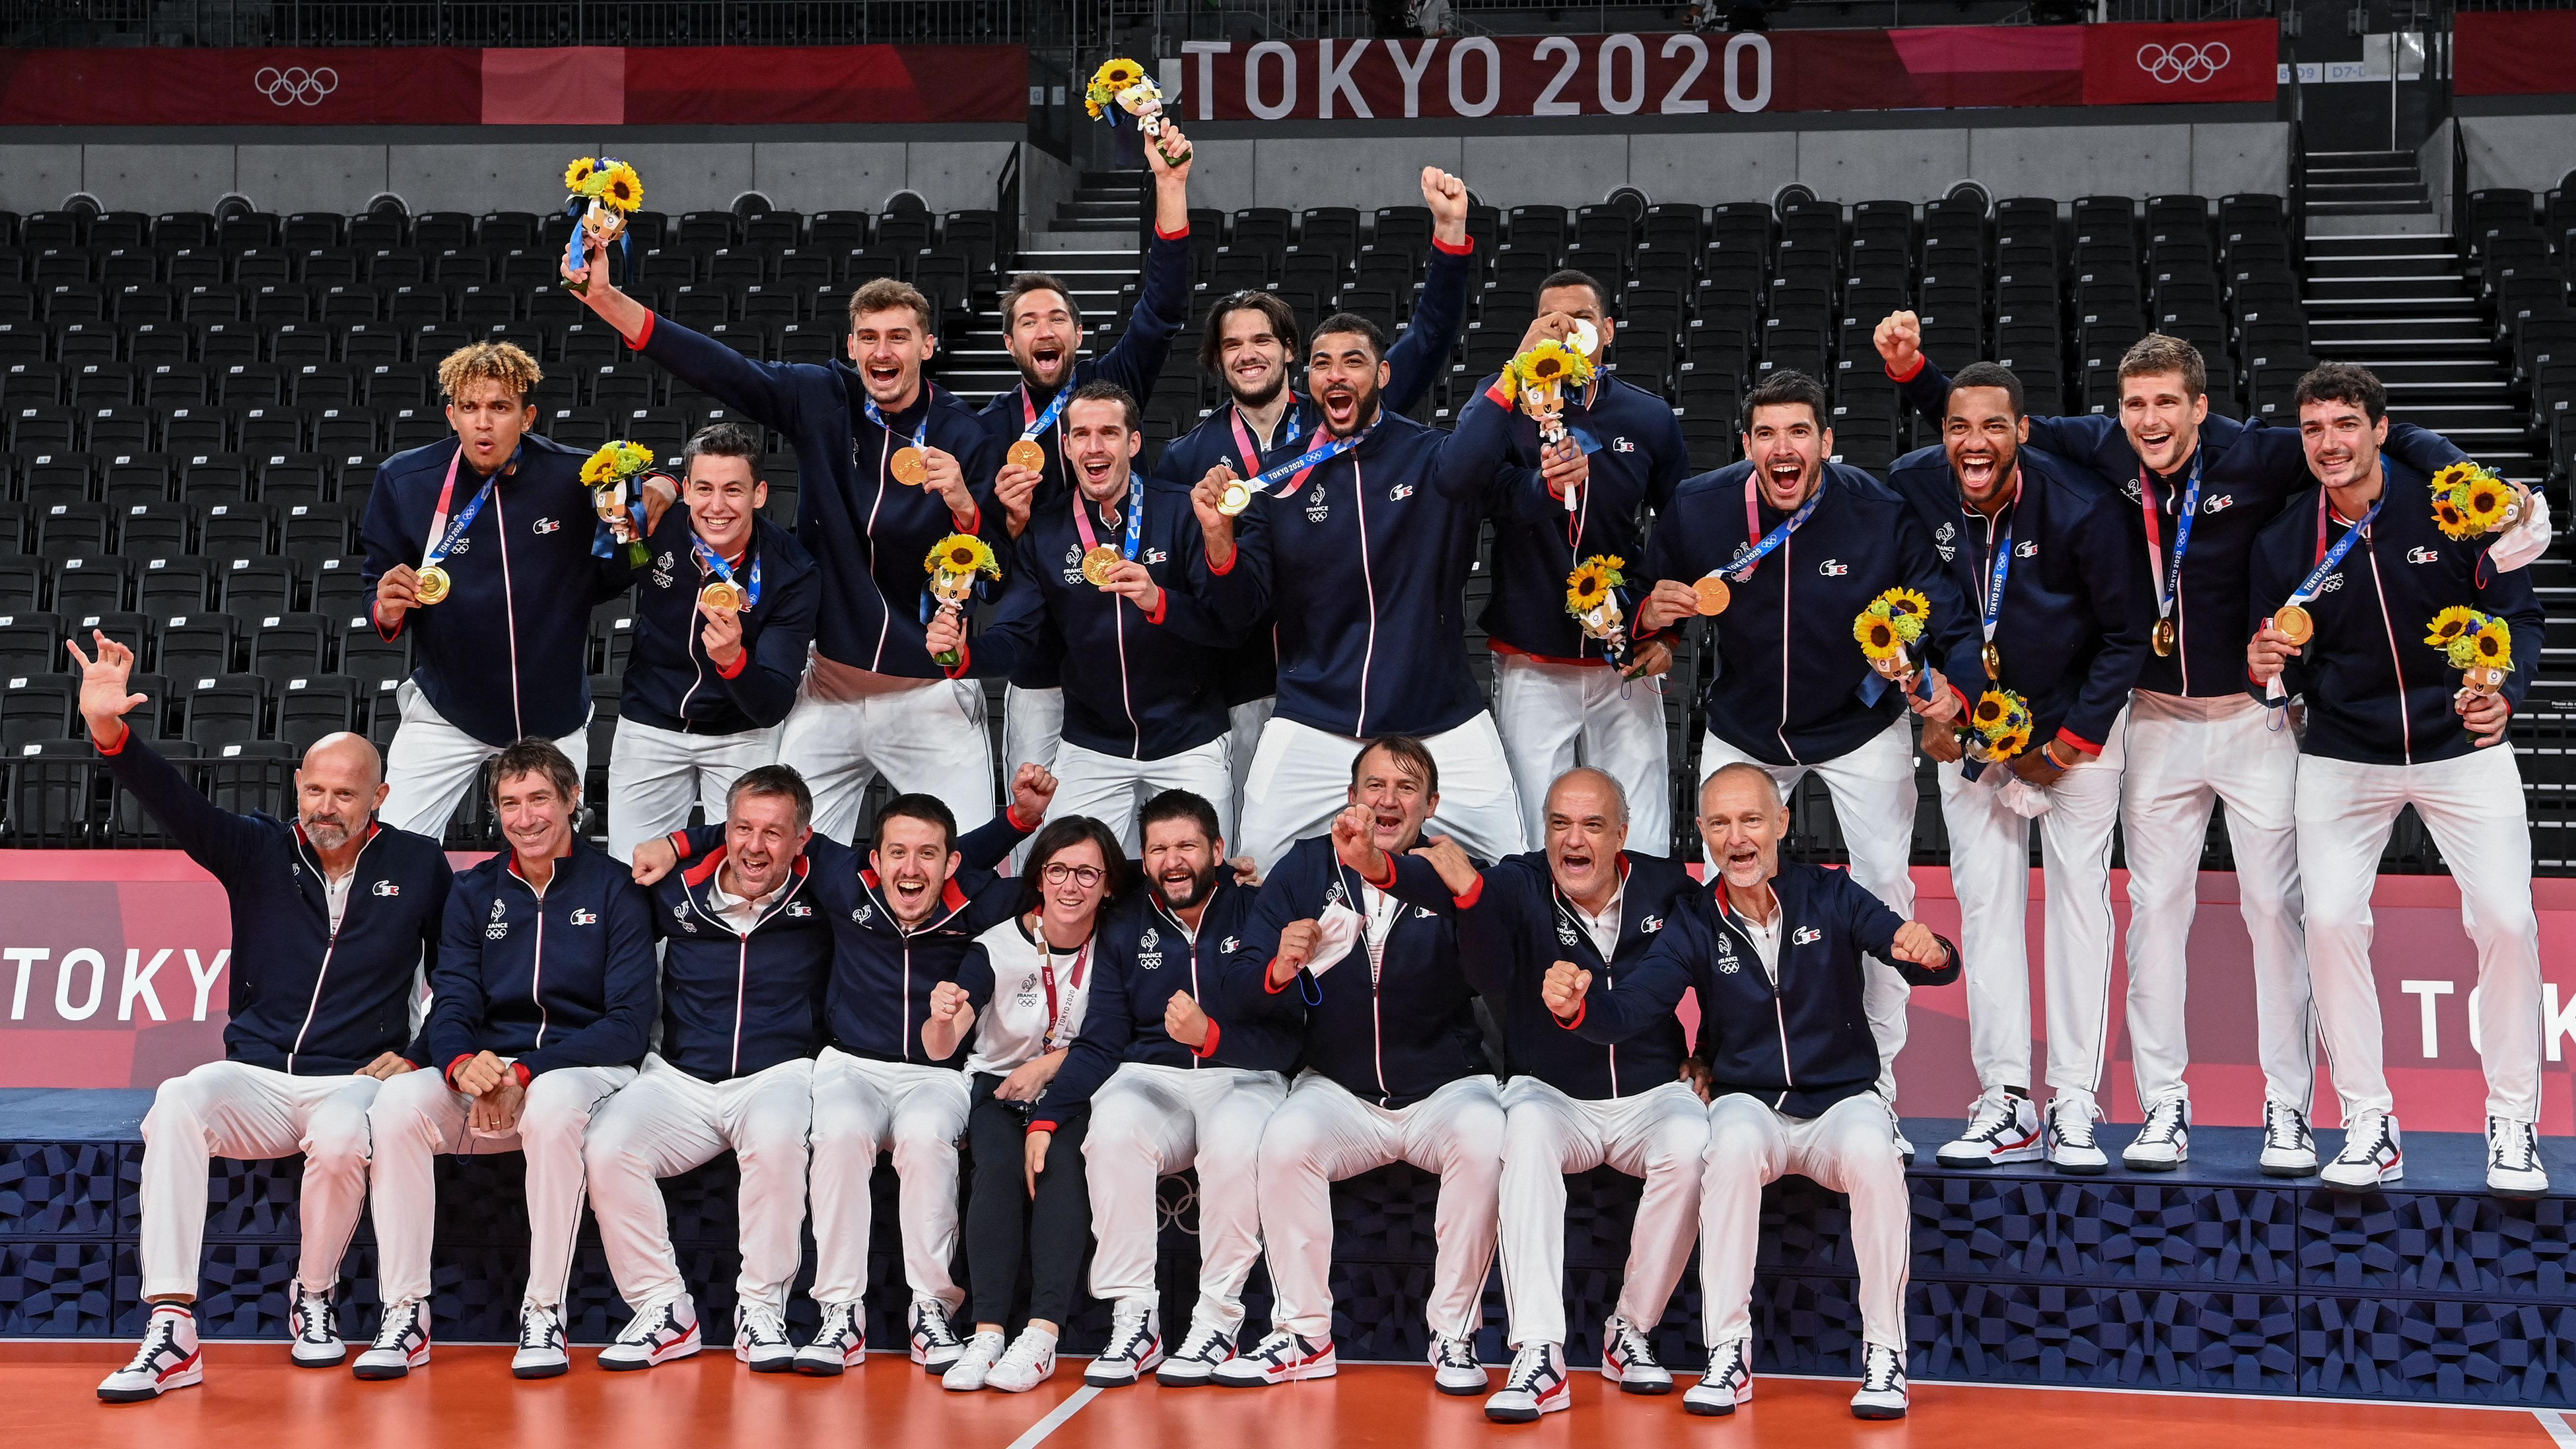 Volleyball at the Paris 2024 Olympics